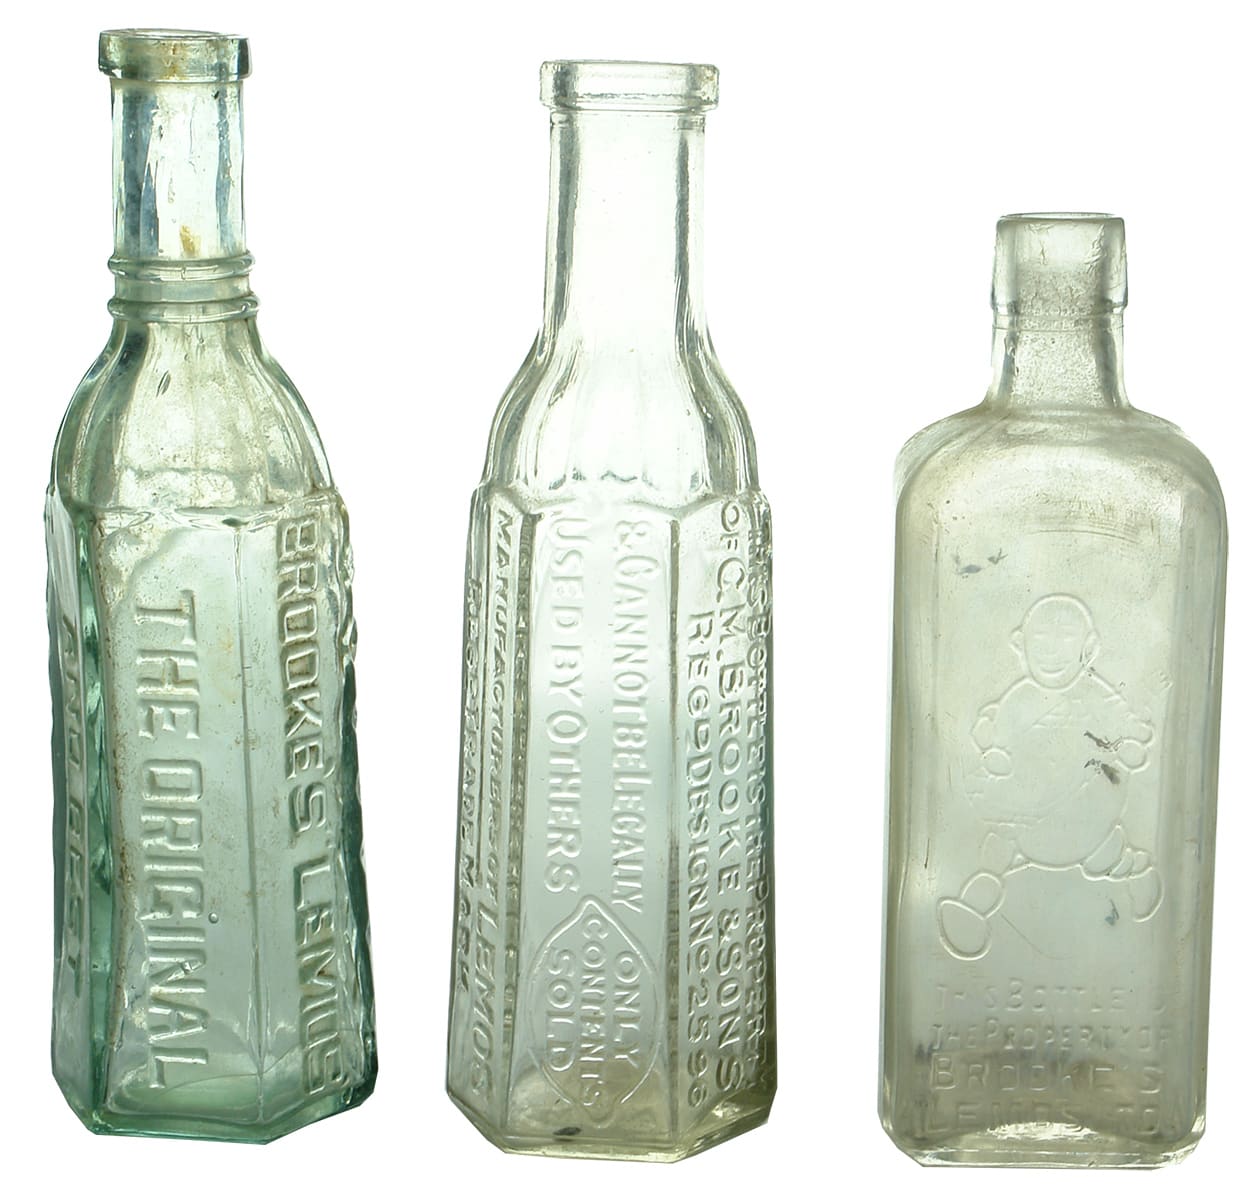 Sample Small Brookes Cordial Bottles